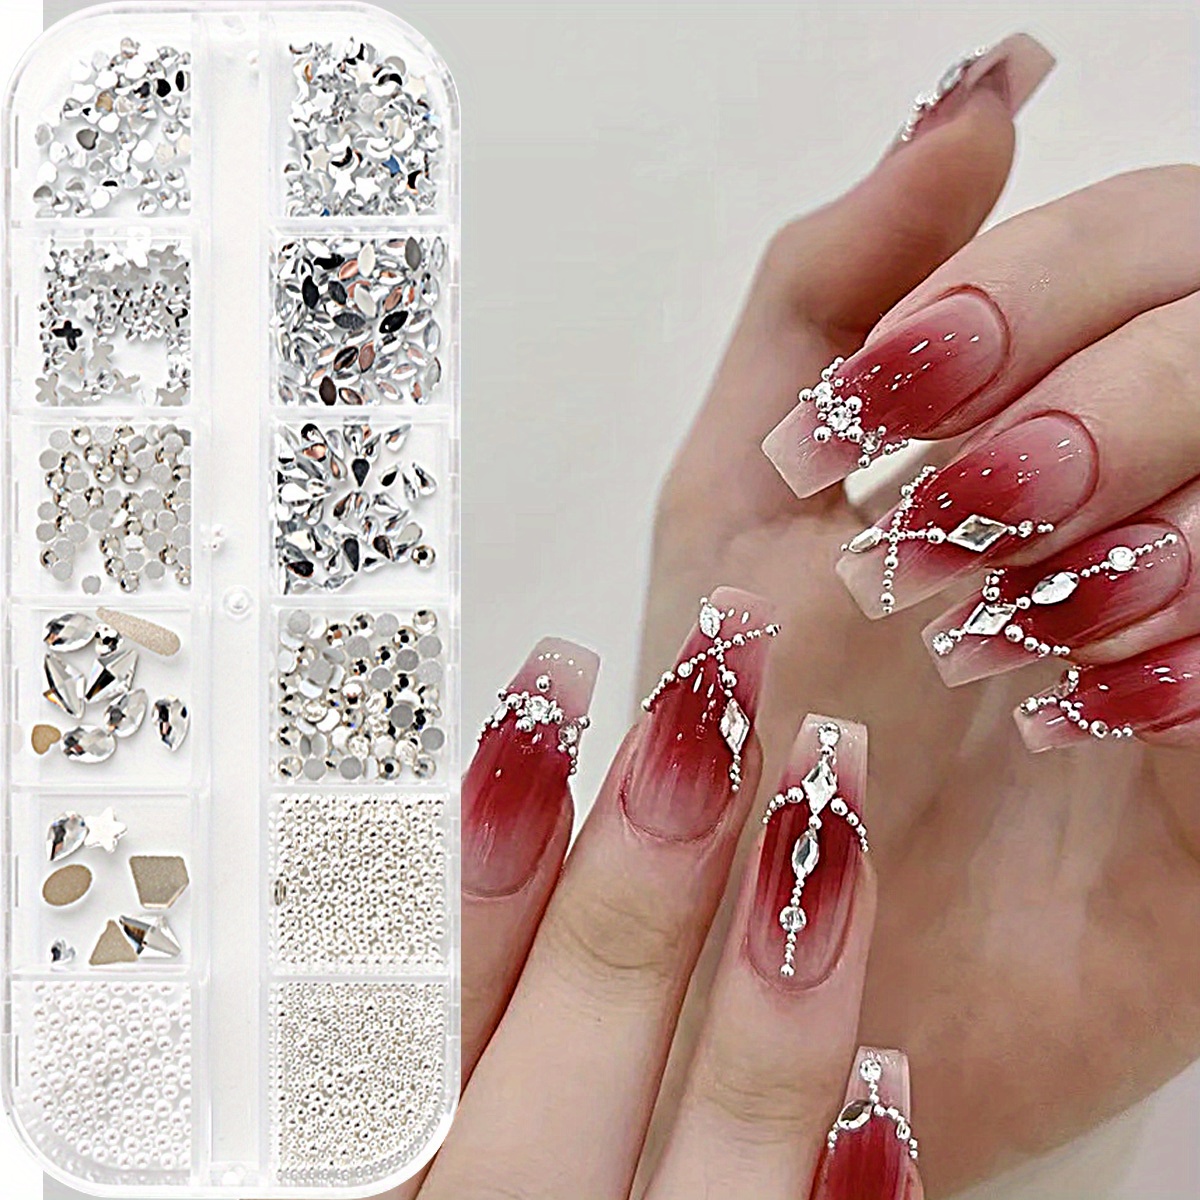 Yantuo Red AB Crystal Rhinestones Ss16 1440 Pcs, 4 mm Siam Glass Flat Back Rhinestone Strass for Nail Art,Tumbler Cup,Shoes,DIY Crafts,Bling Project